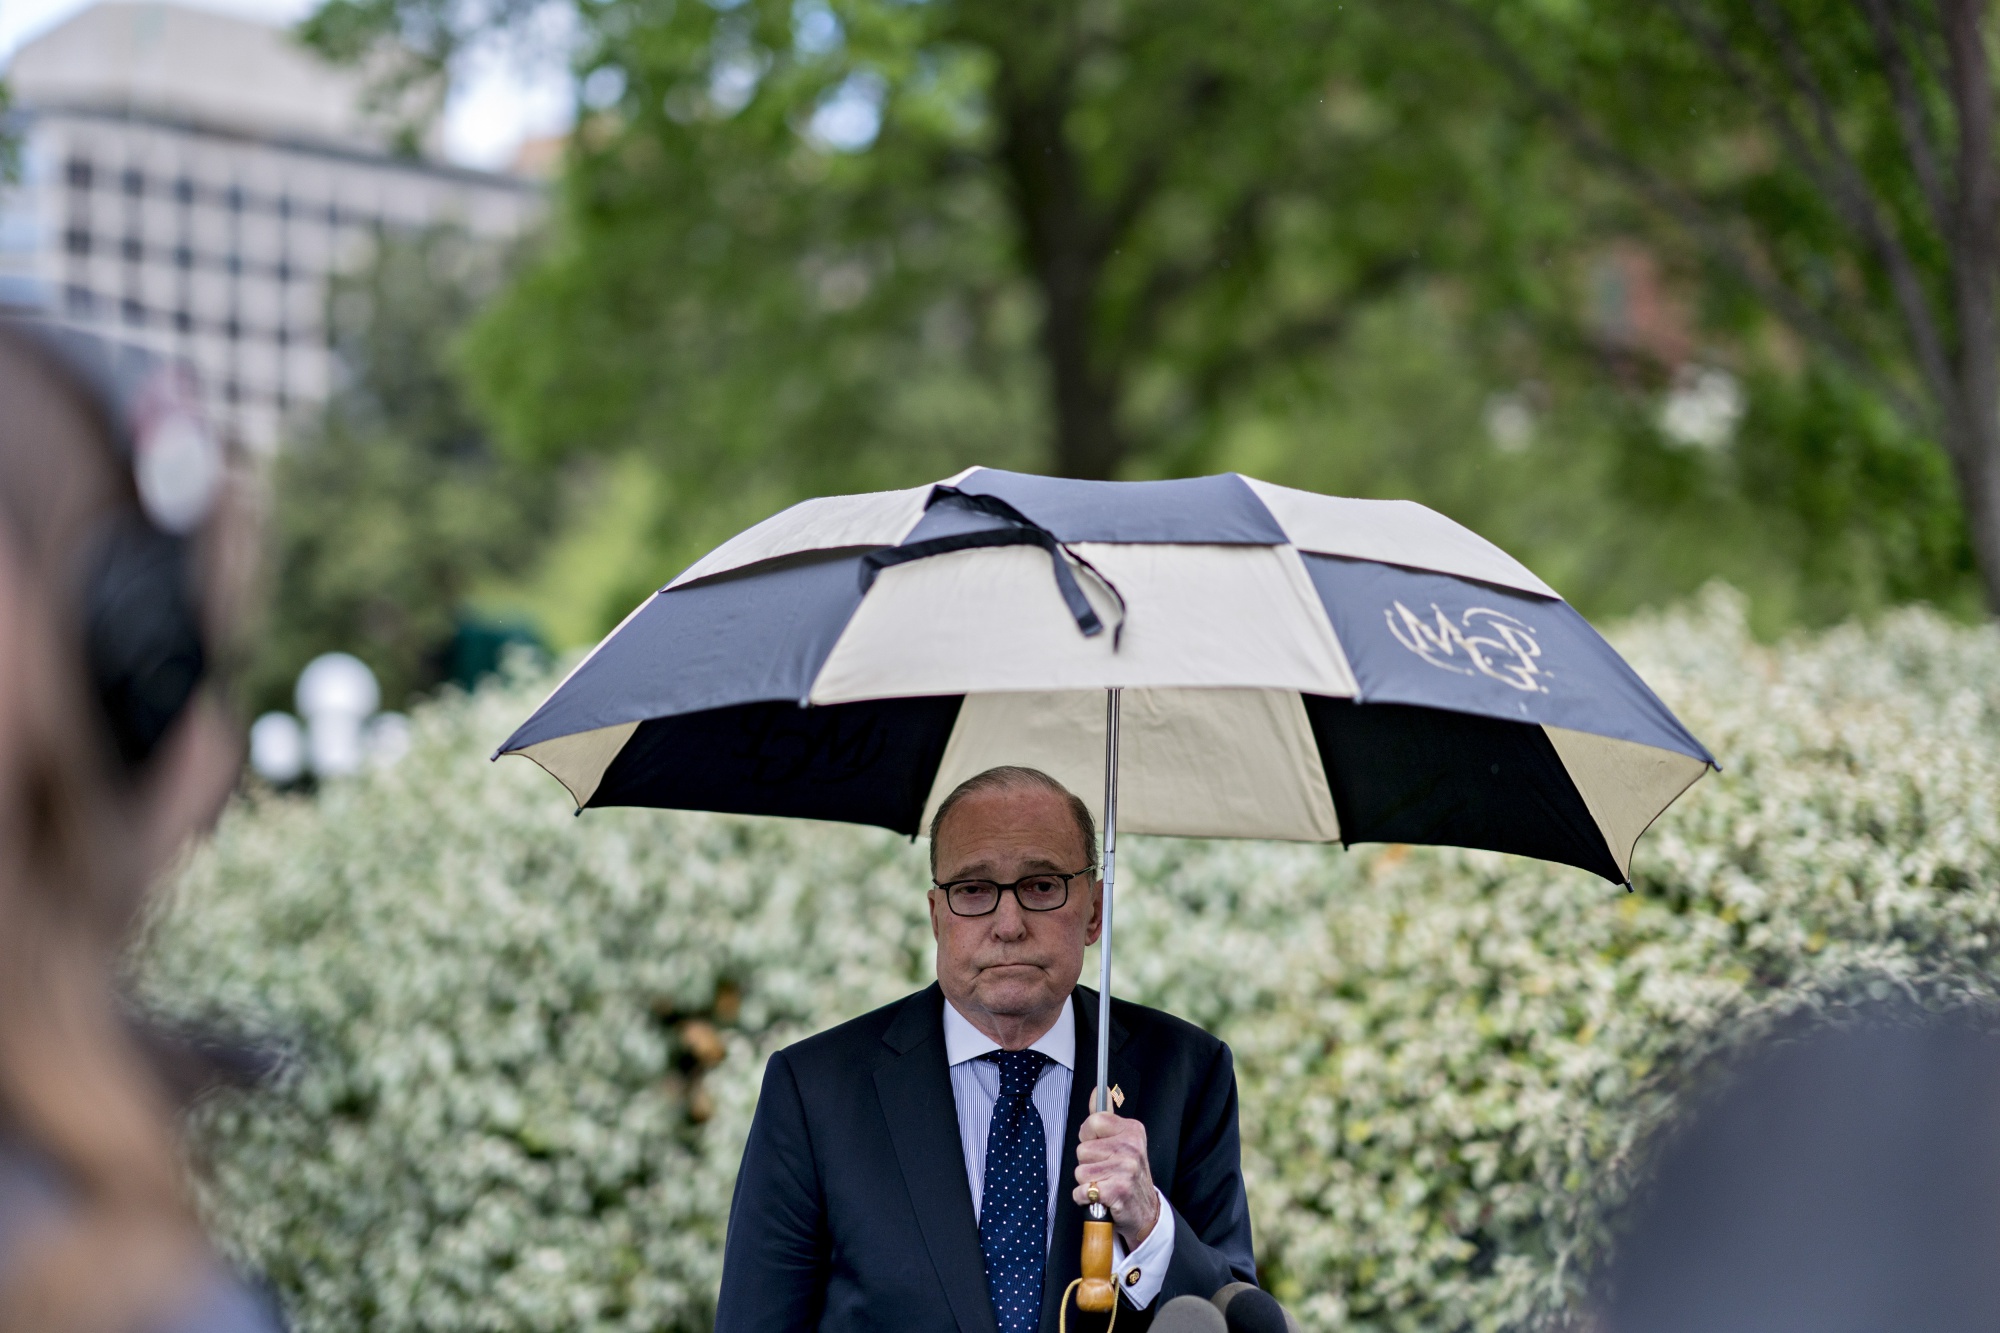 Larry Kudlow pauses while speaking to members of the media outside the White House in Washington, D.C. on April 15, 2019.